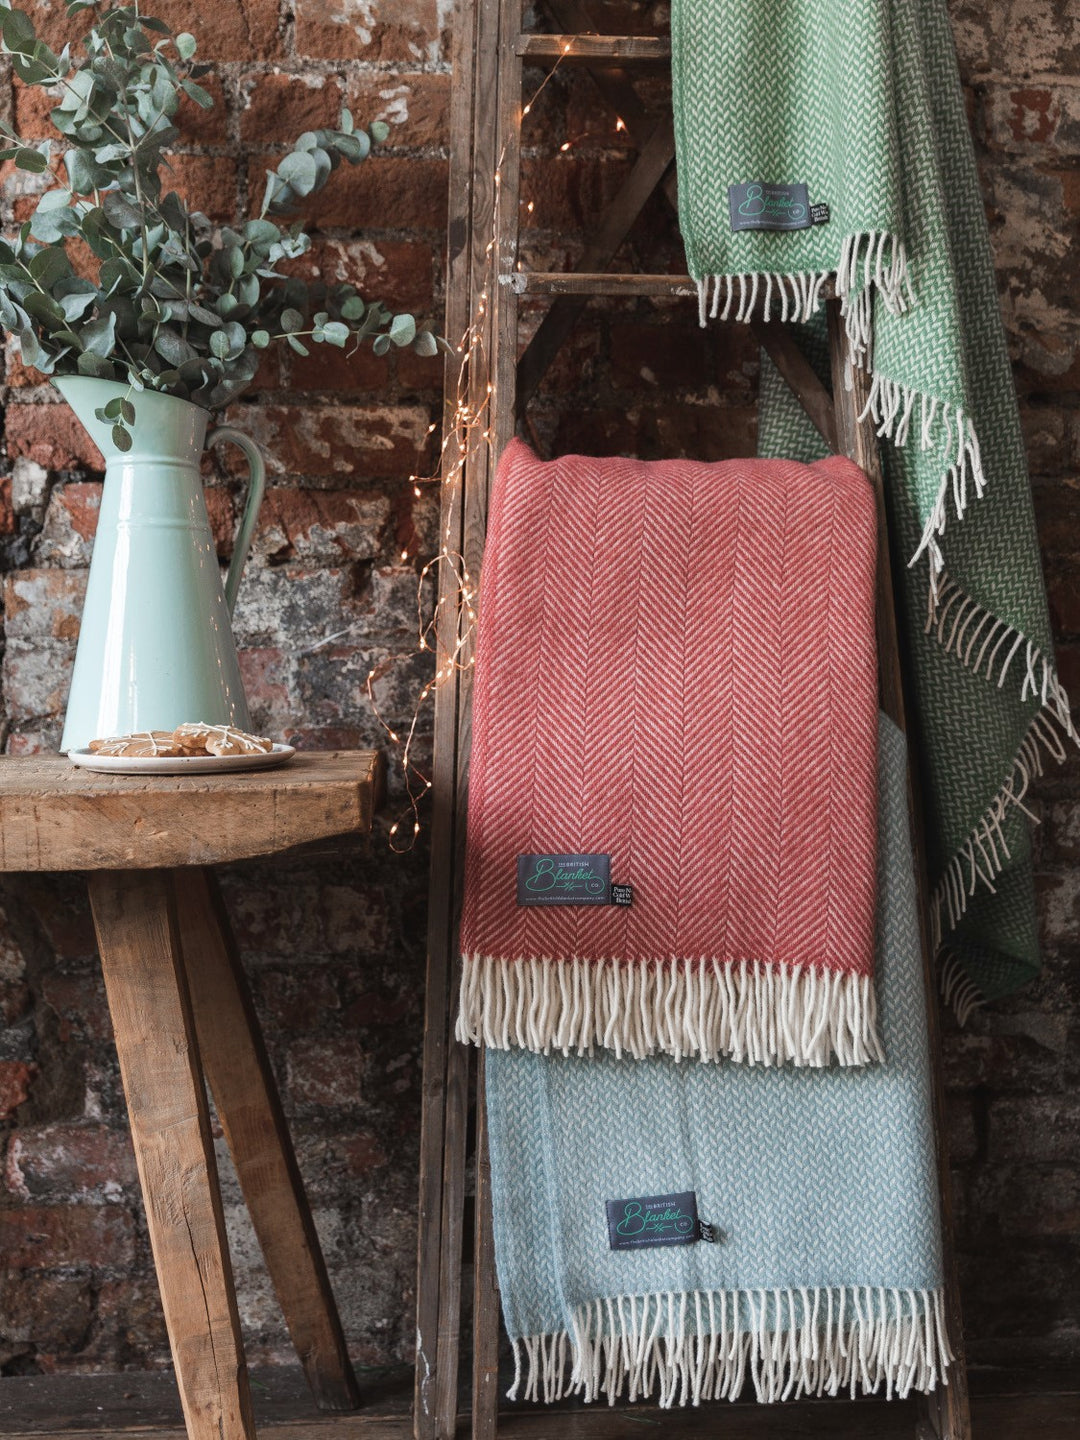 Three wool blankets in green, red, and blue hanging on a wooden ladder